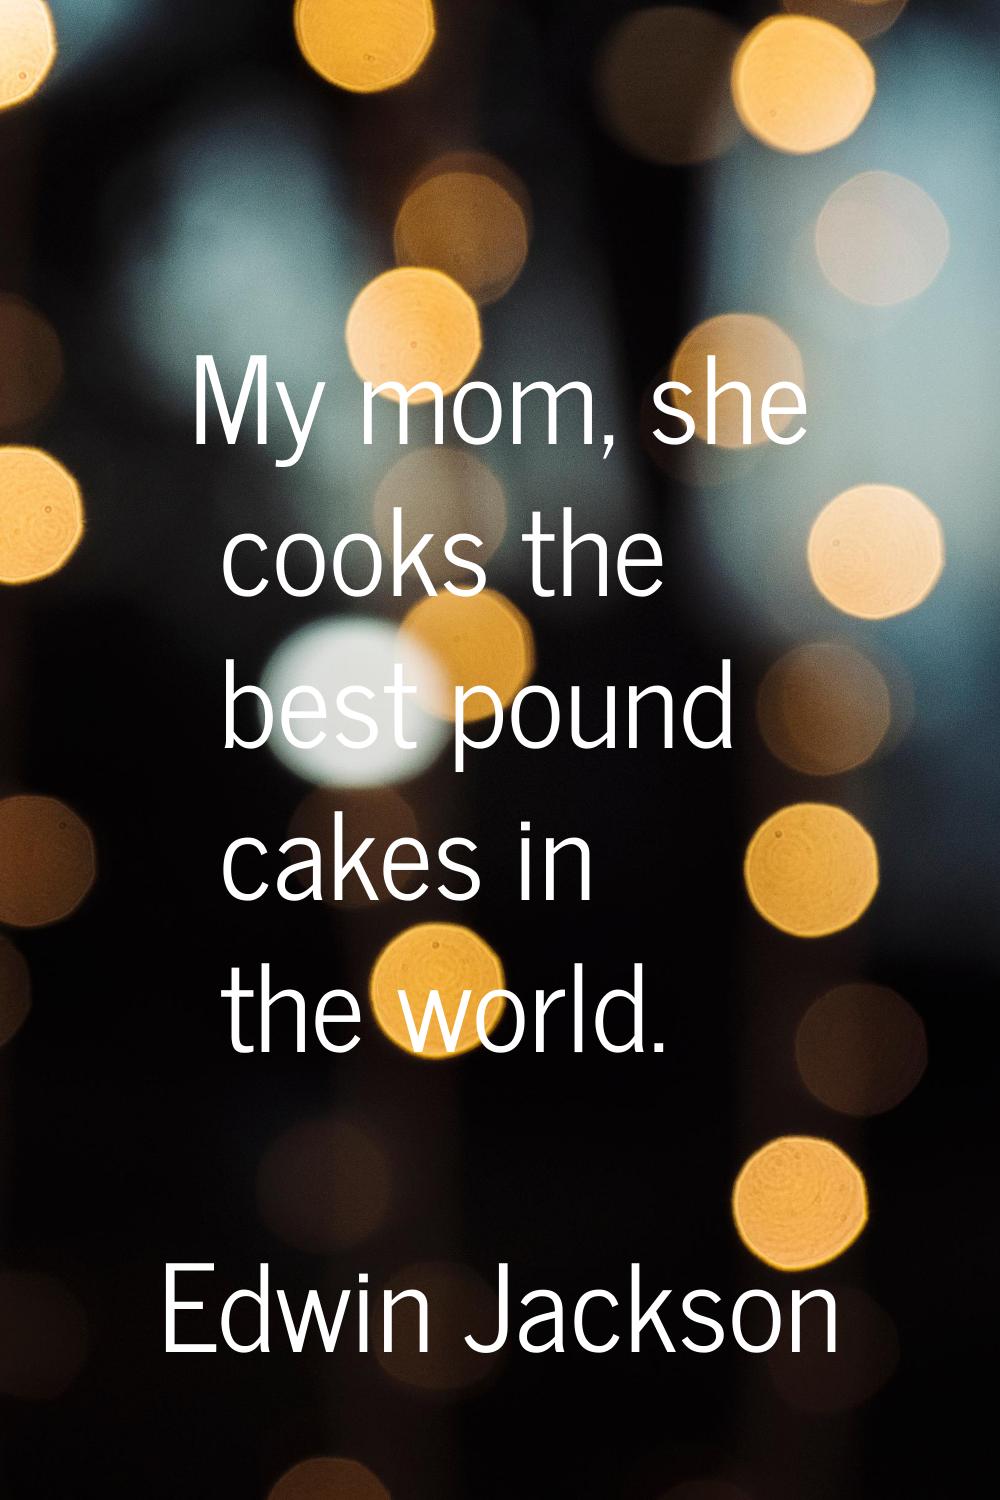 My mom, she cooks the best pound cakes in the world.